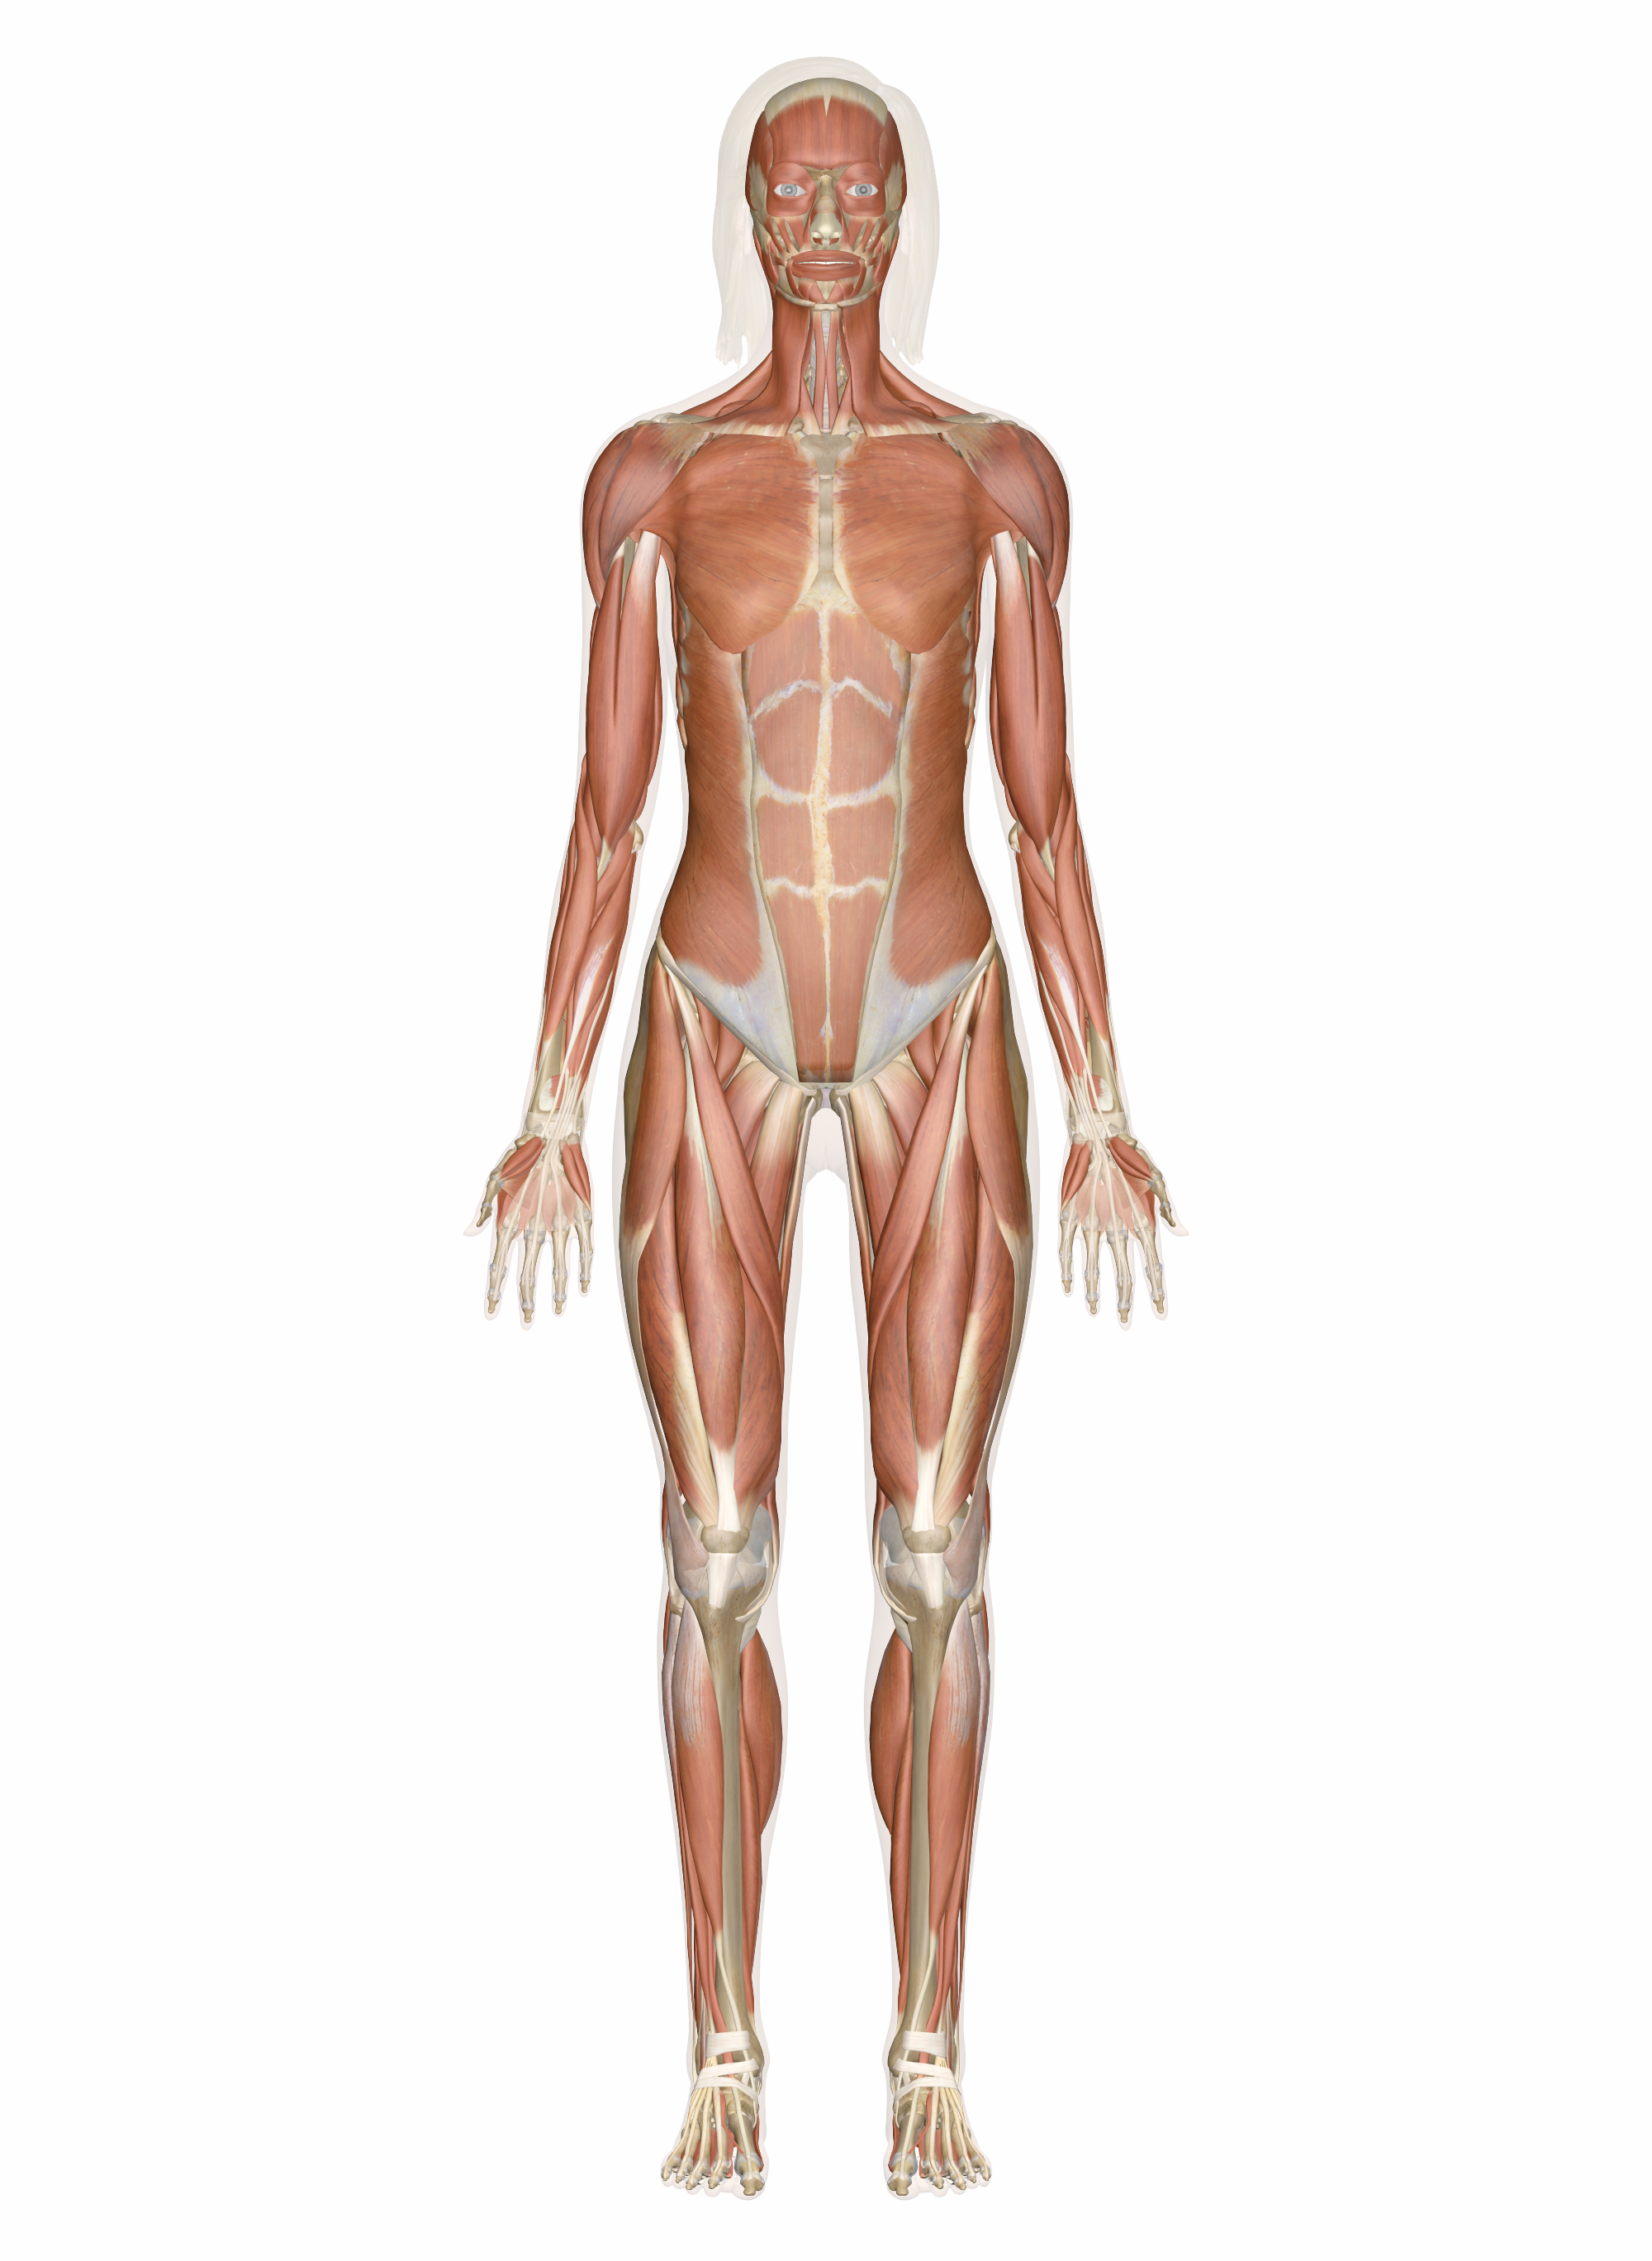 Muscular System Diagram Muscular System Muscles Of The Human Body